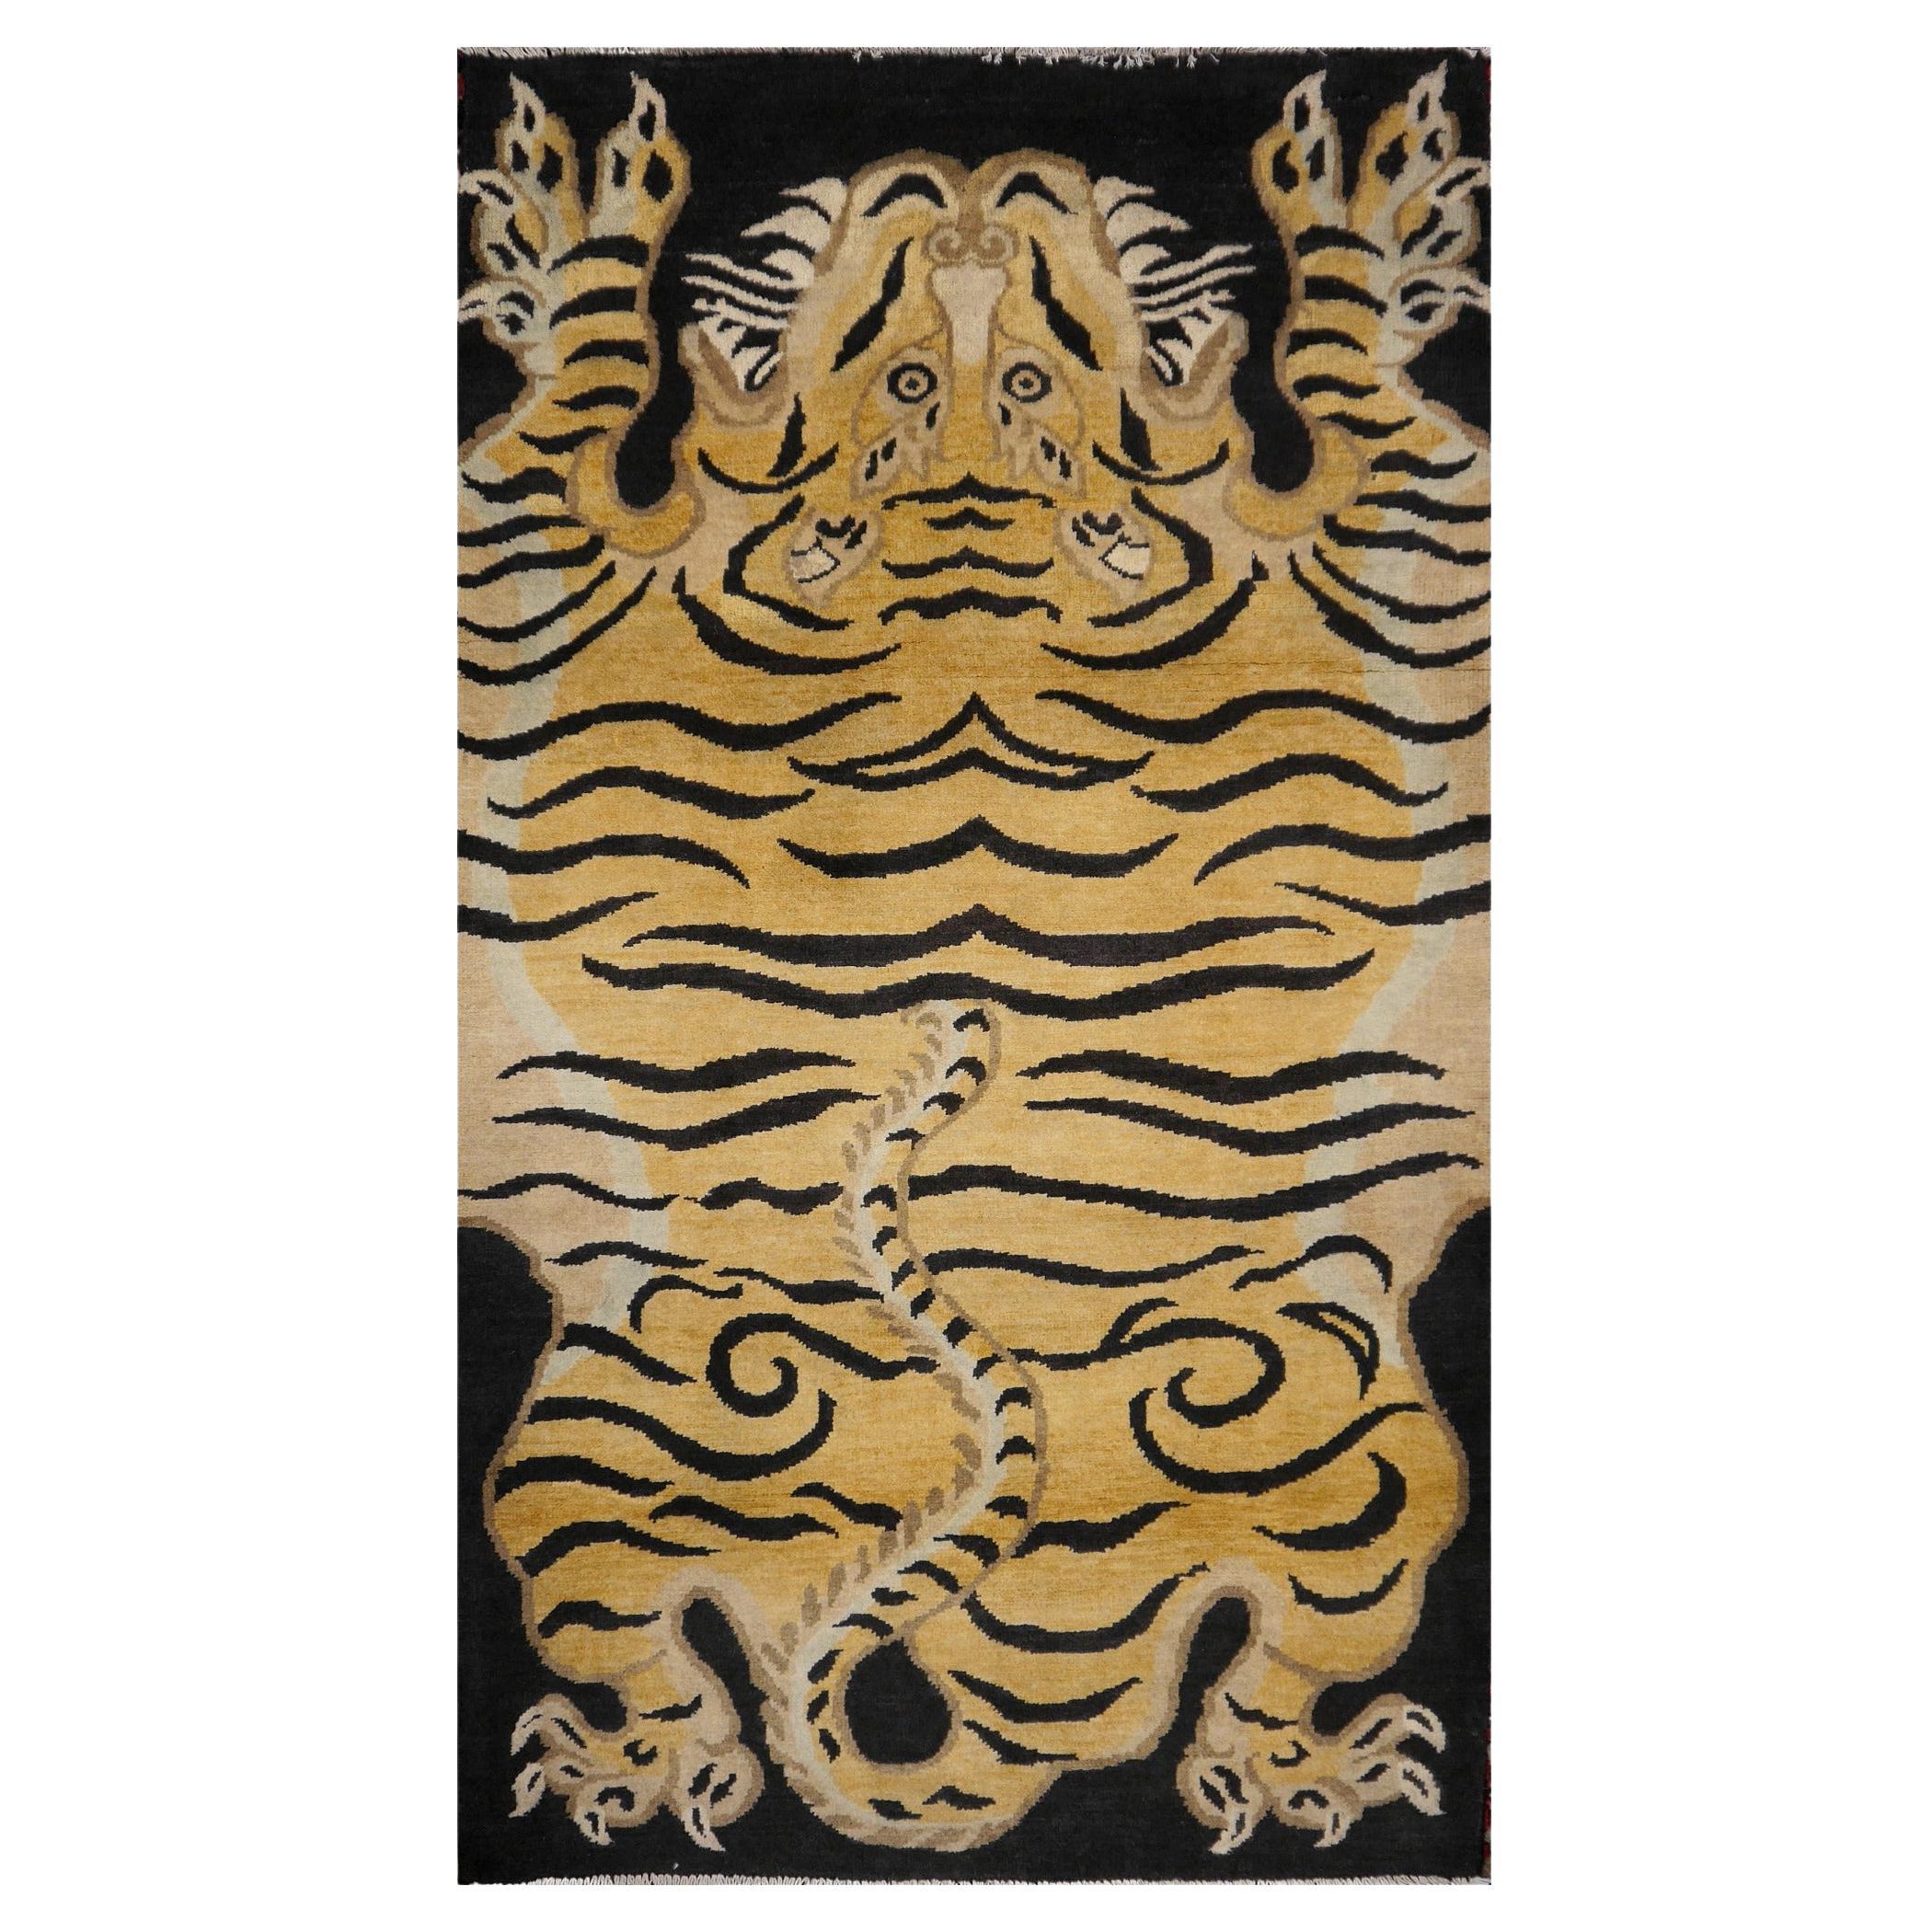 Tiger Rug Pure Wool Hand Knotted by Djoharian Collection Antique Design